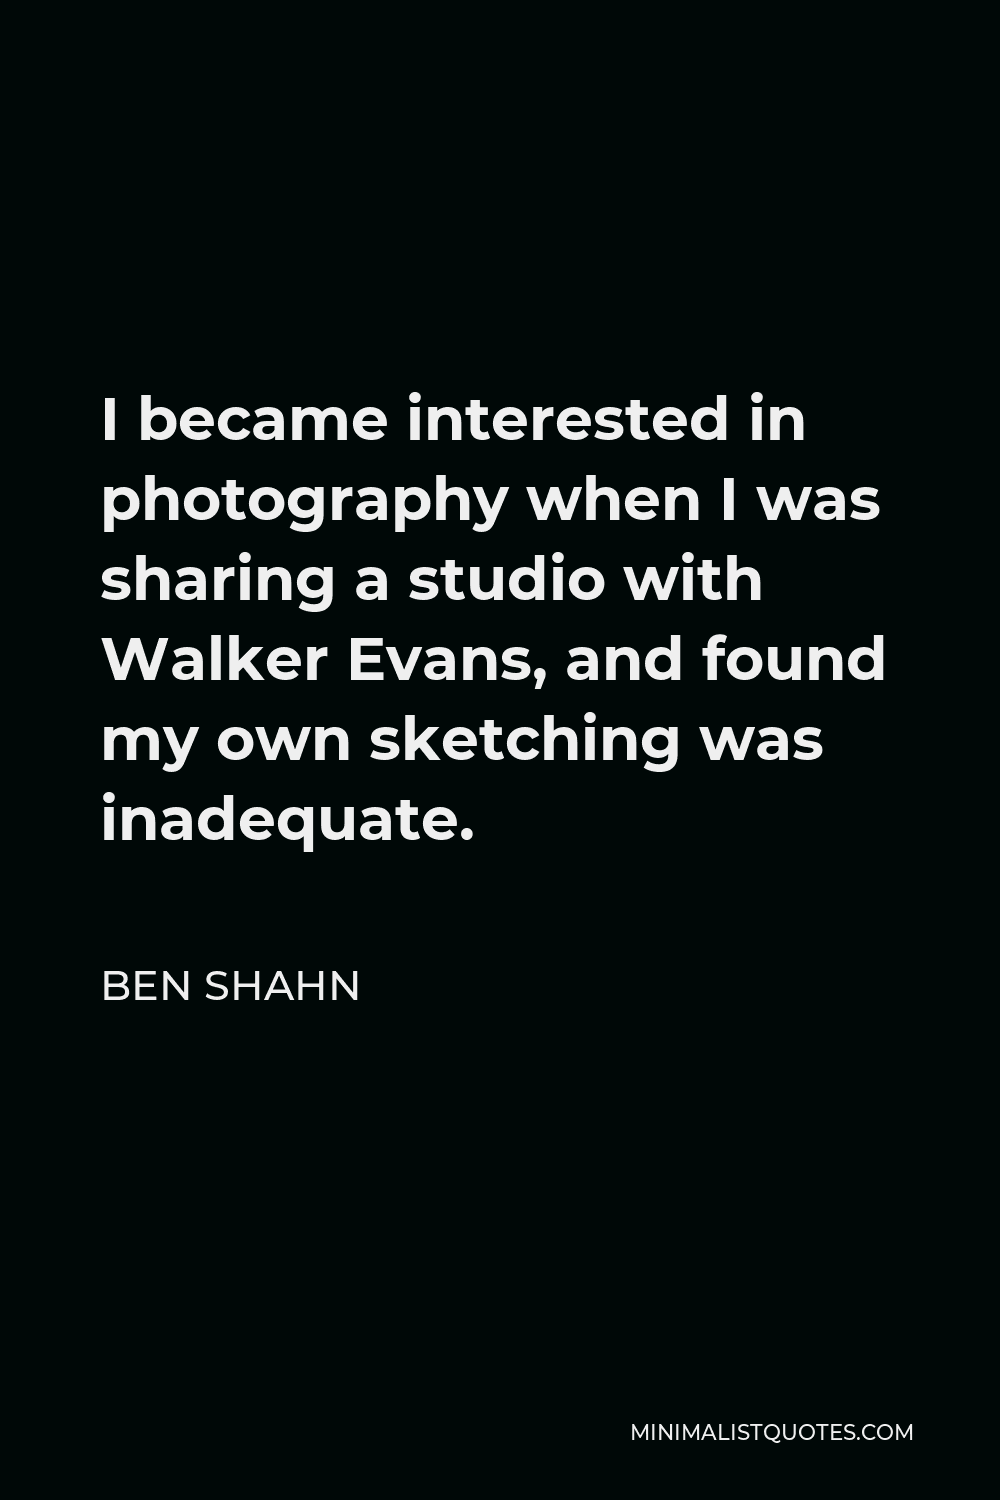 Ben Shahn Quote - I became interested in photography when I was sharing a studio with Walker Evans, and found my own sketching was inadequate.